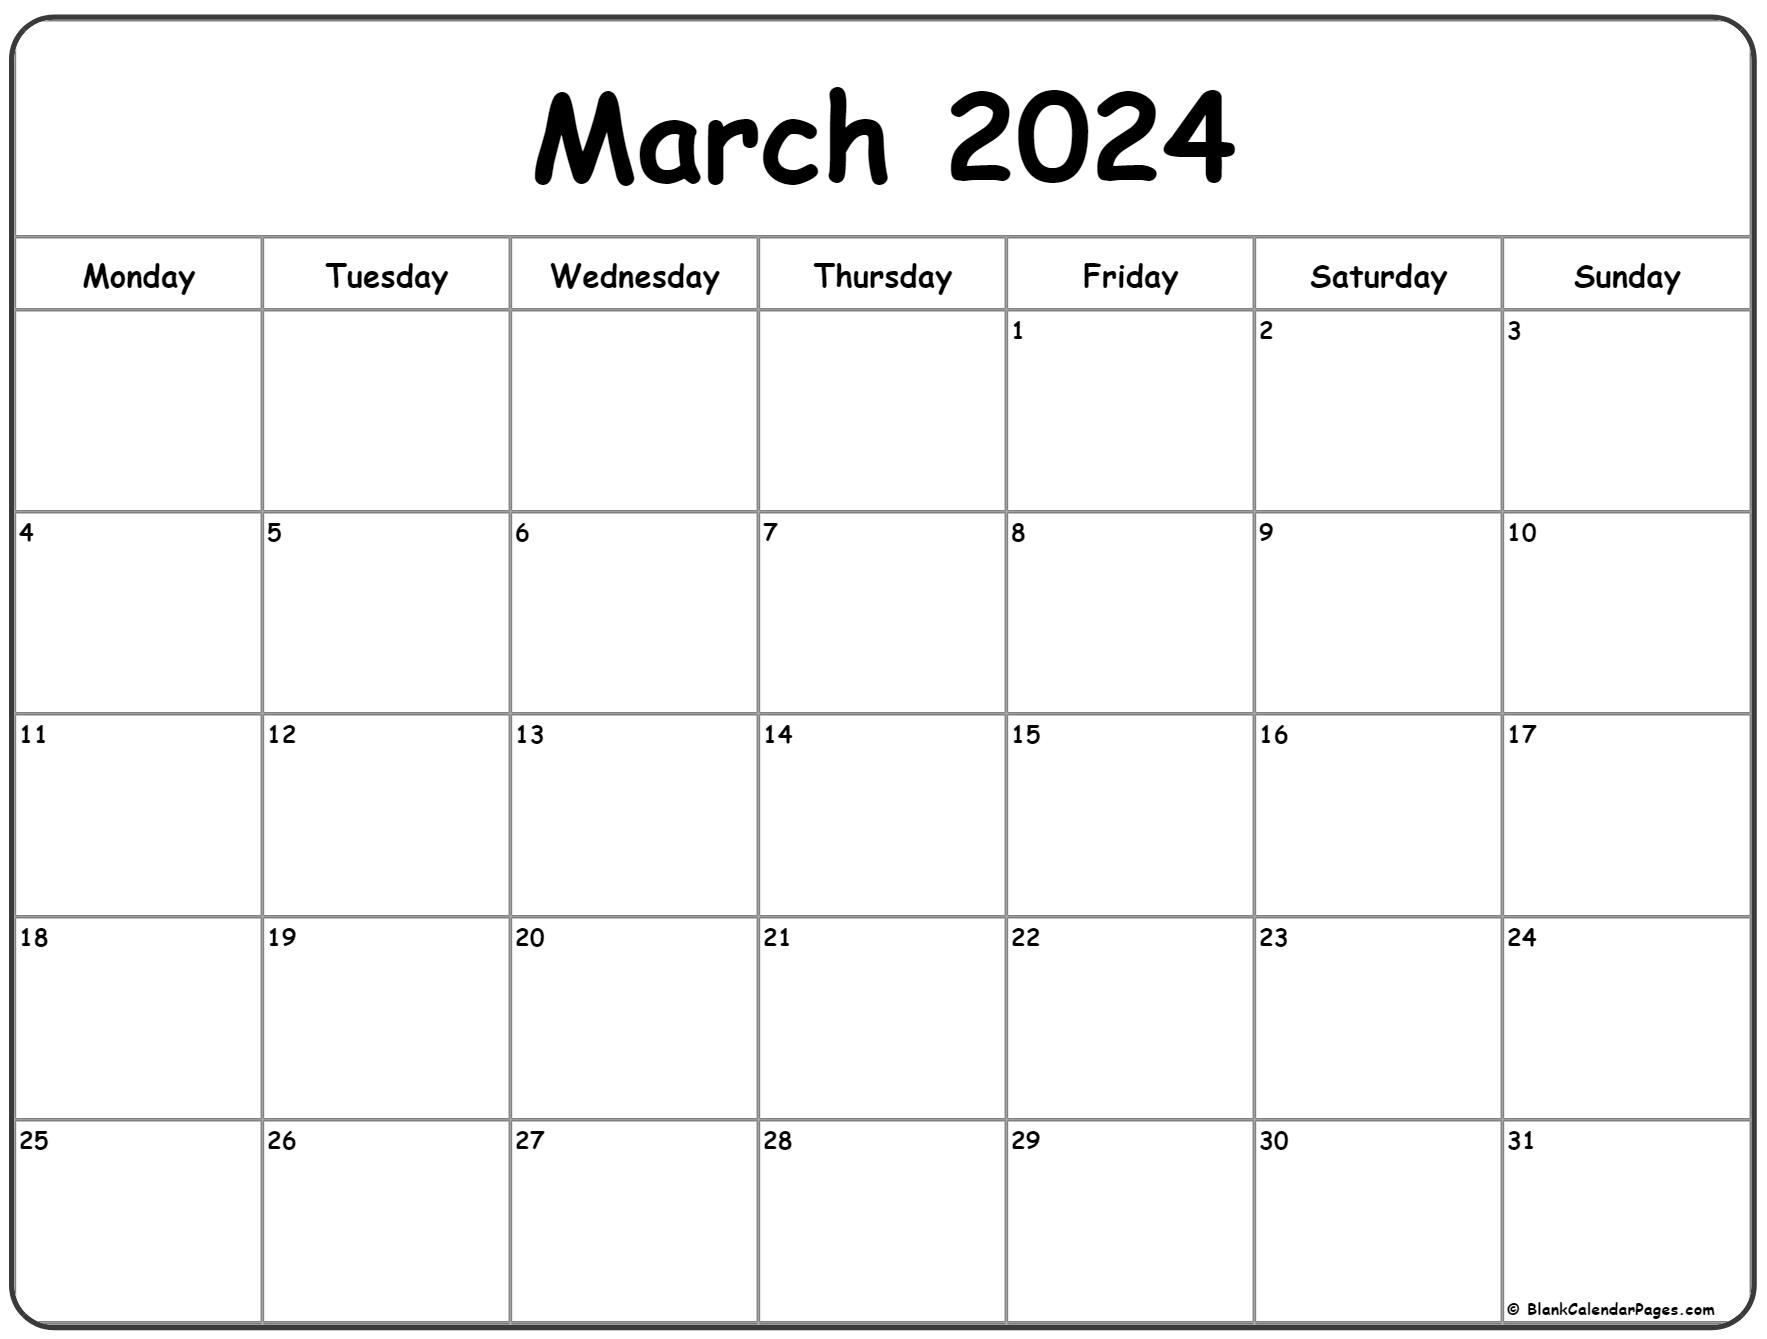 March 2024 Monday Calendar | Monday To Sunday for Blank Calendar March 2024 Free Printable